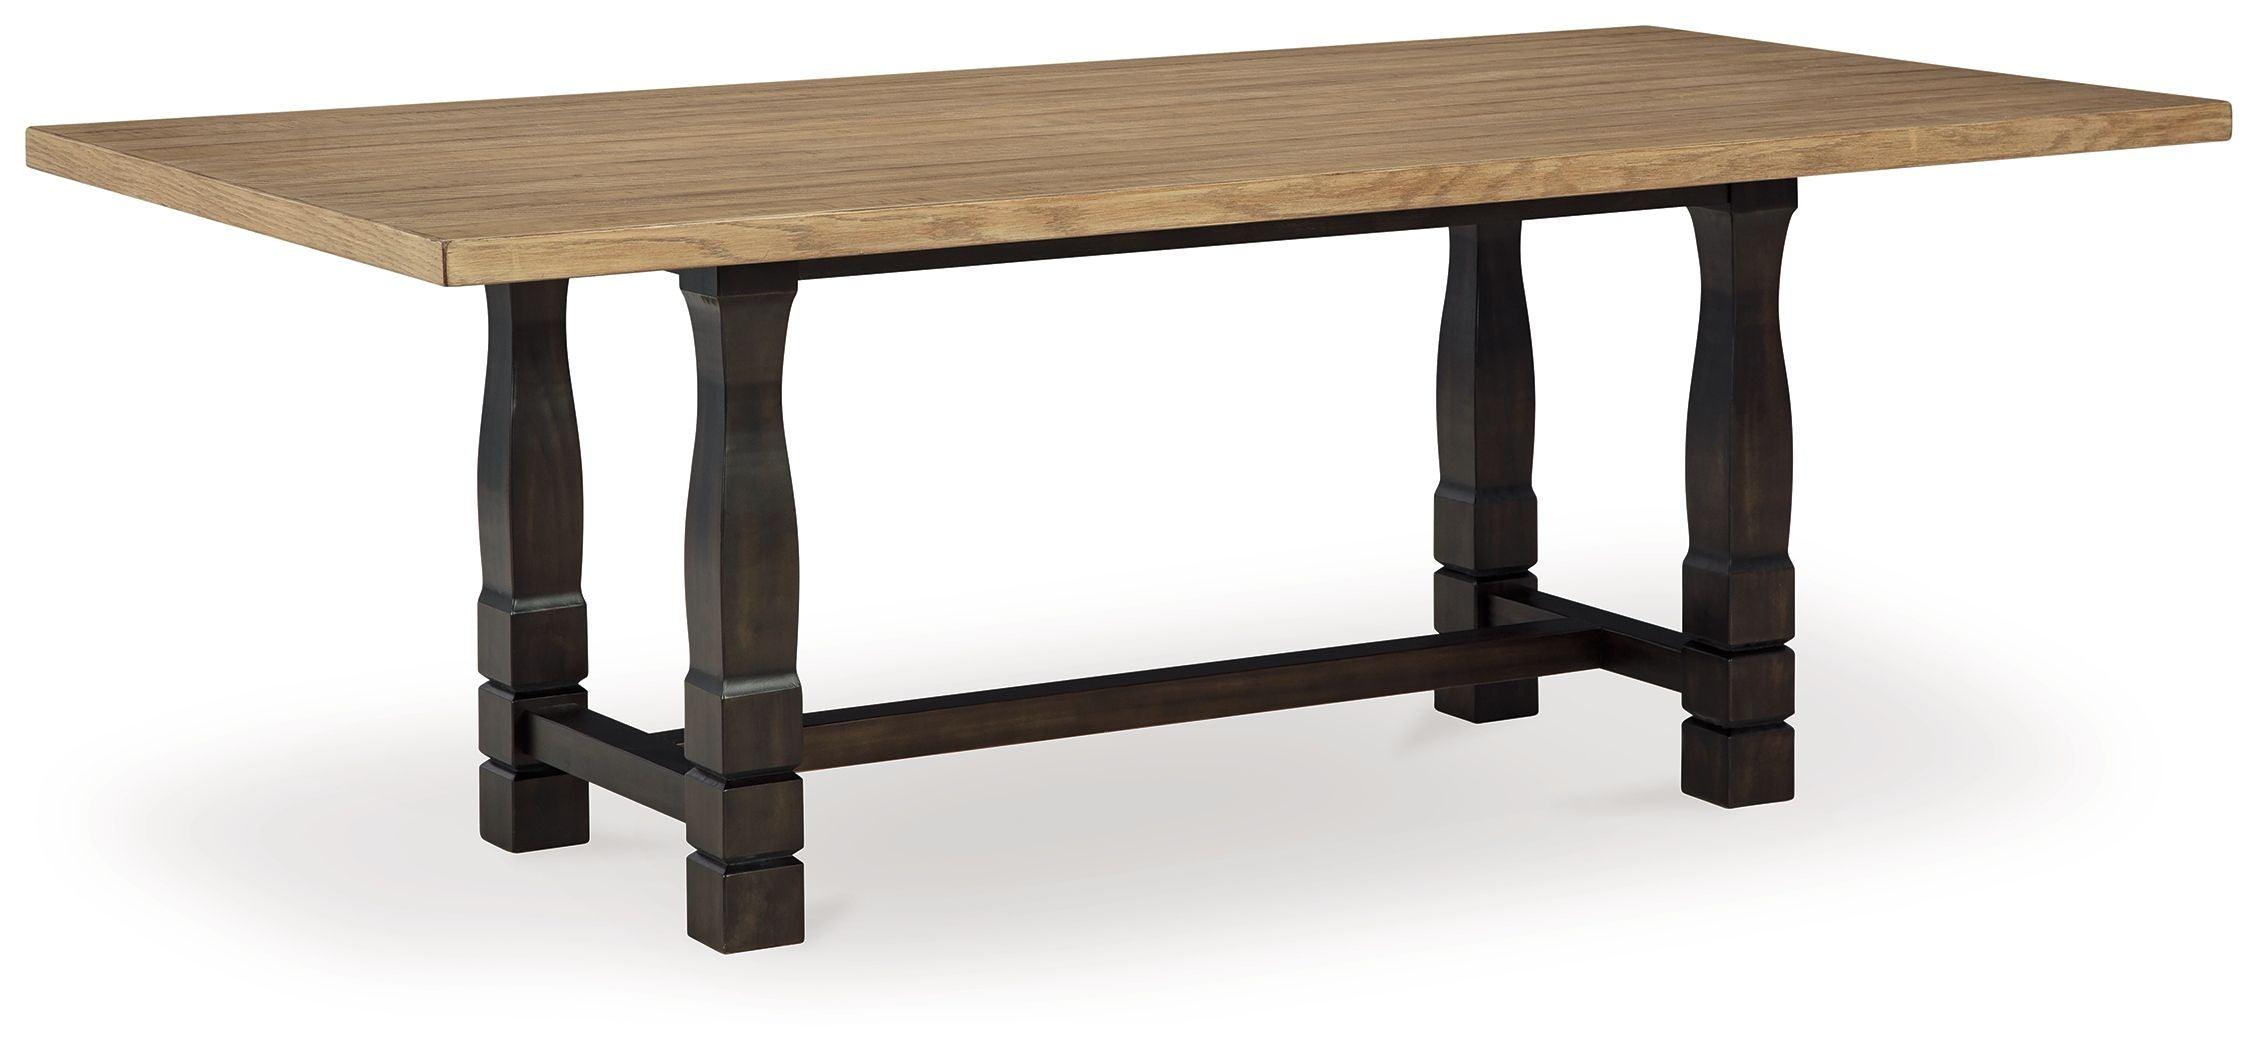 Signature Design by Ashley® - Charterton - Two-tone Brown - Rectangular Dining Room Table - 5th Avenue Furniture